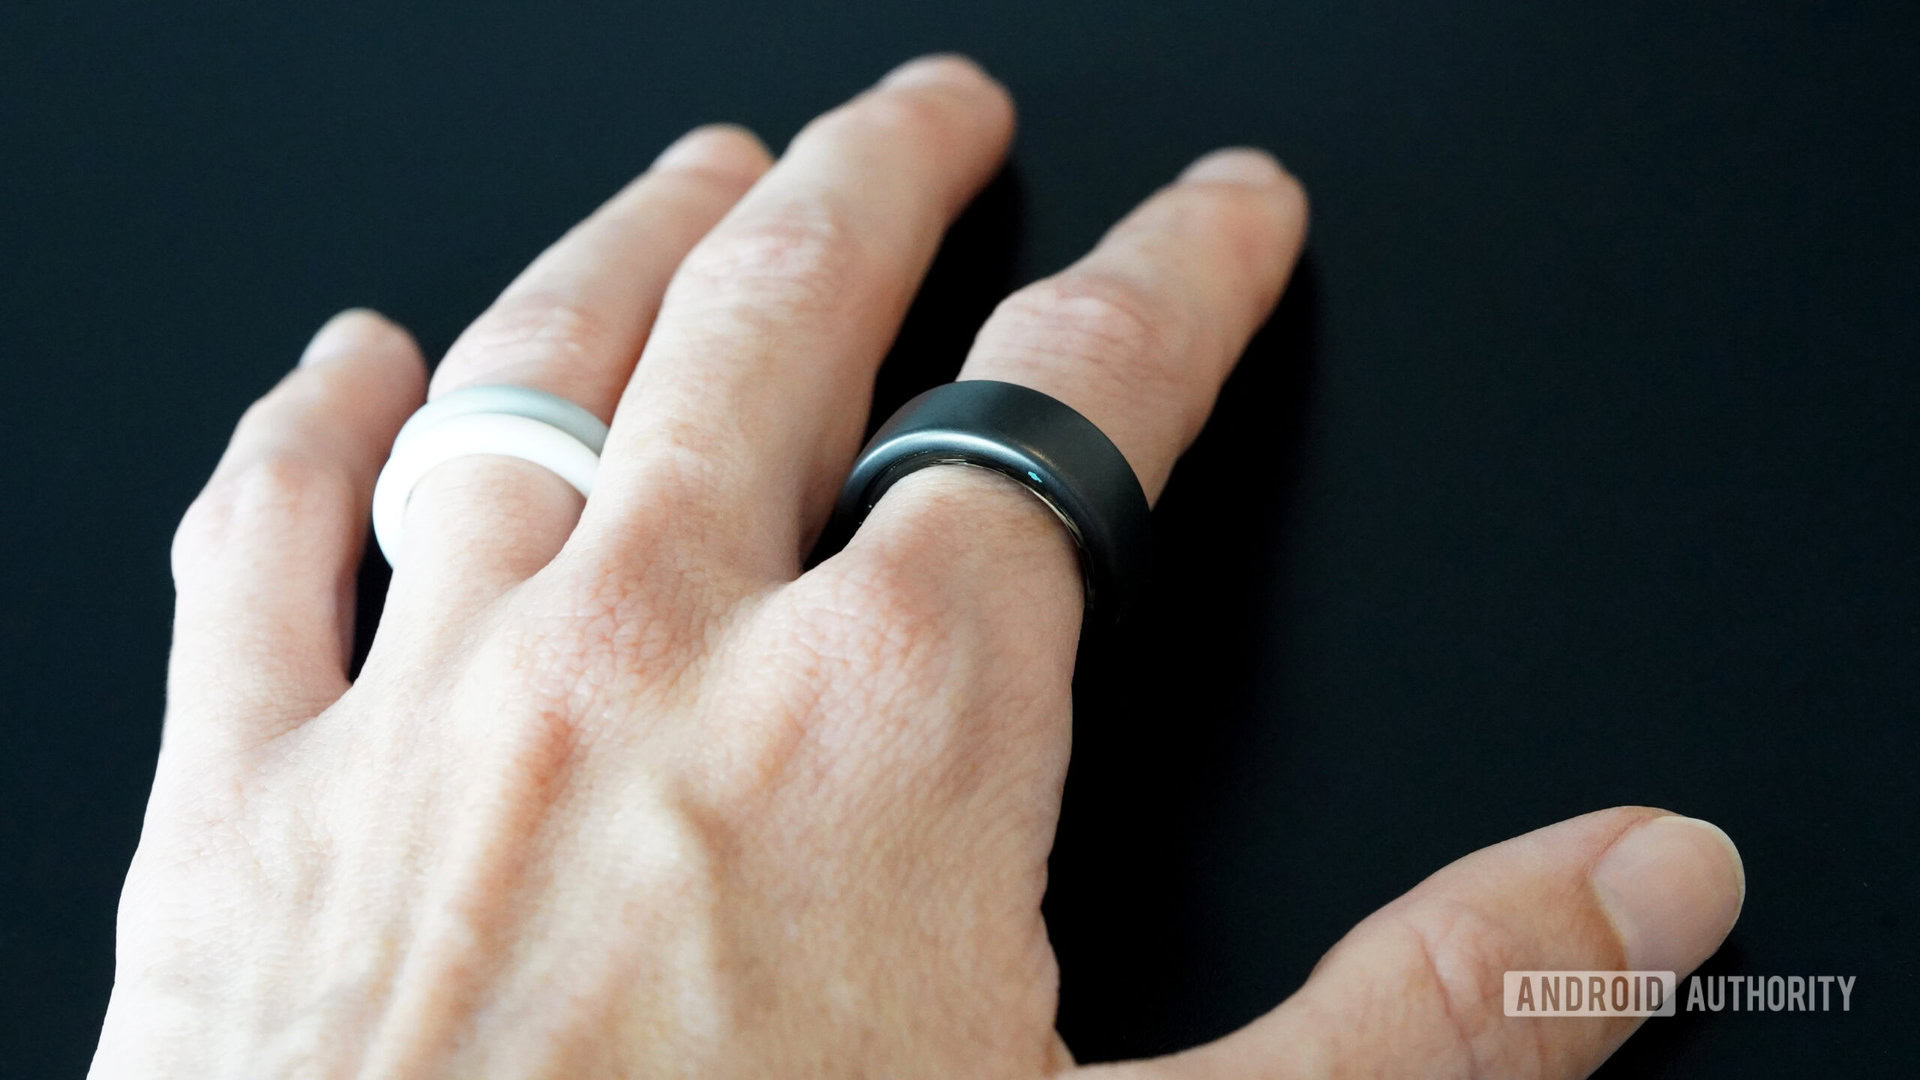 Apple is thinking about a smart ring for notifications and